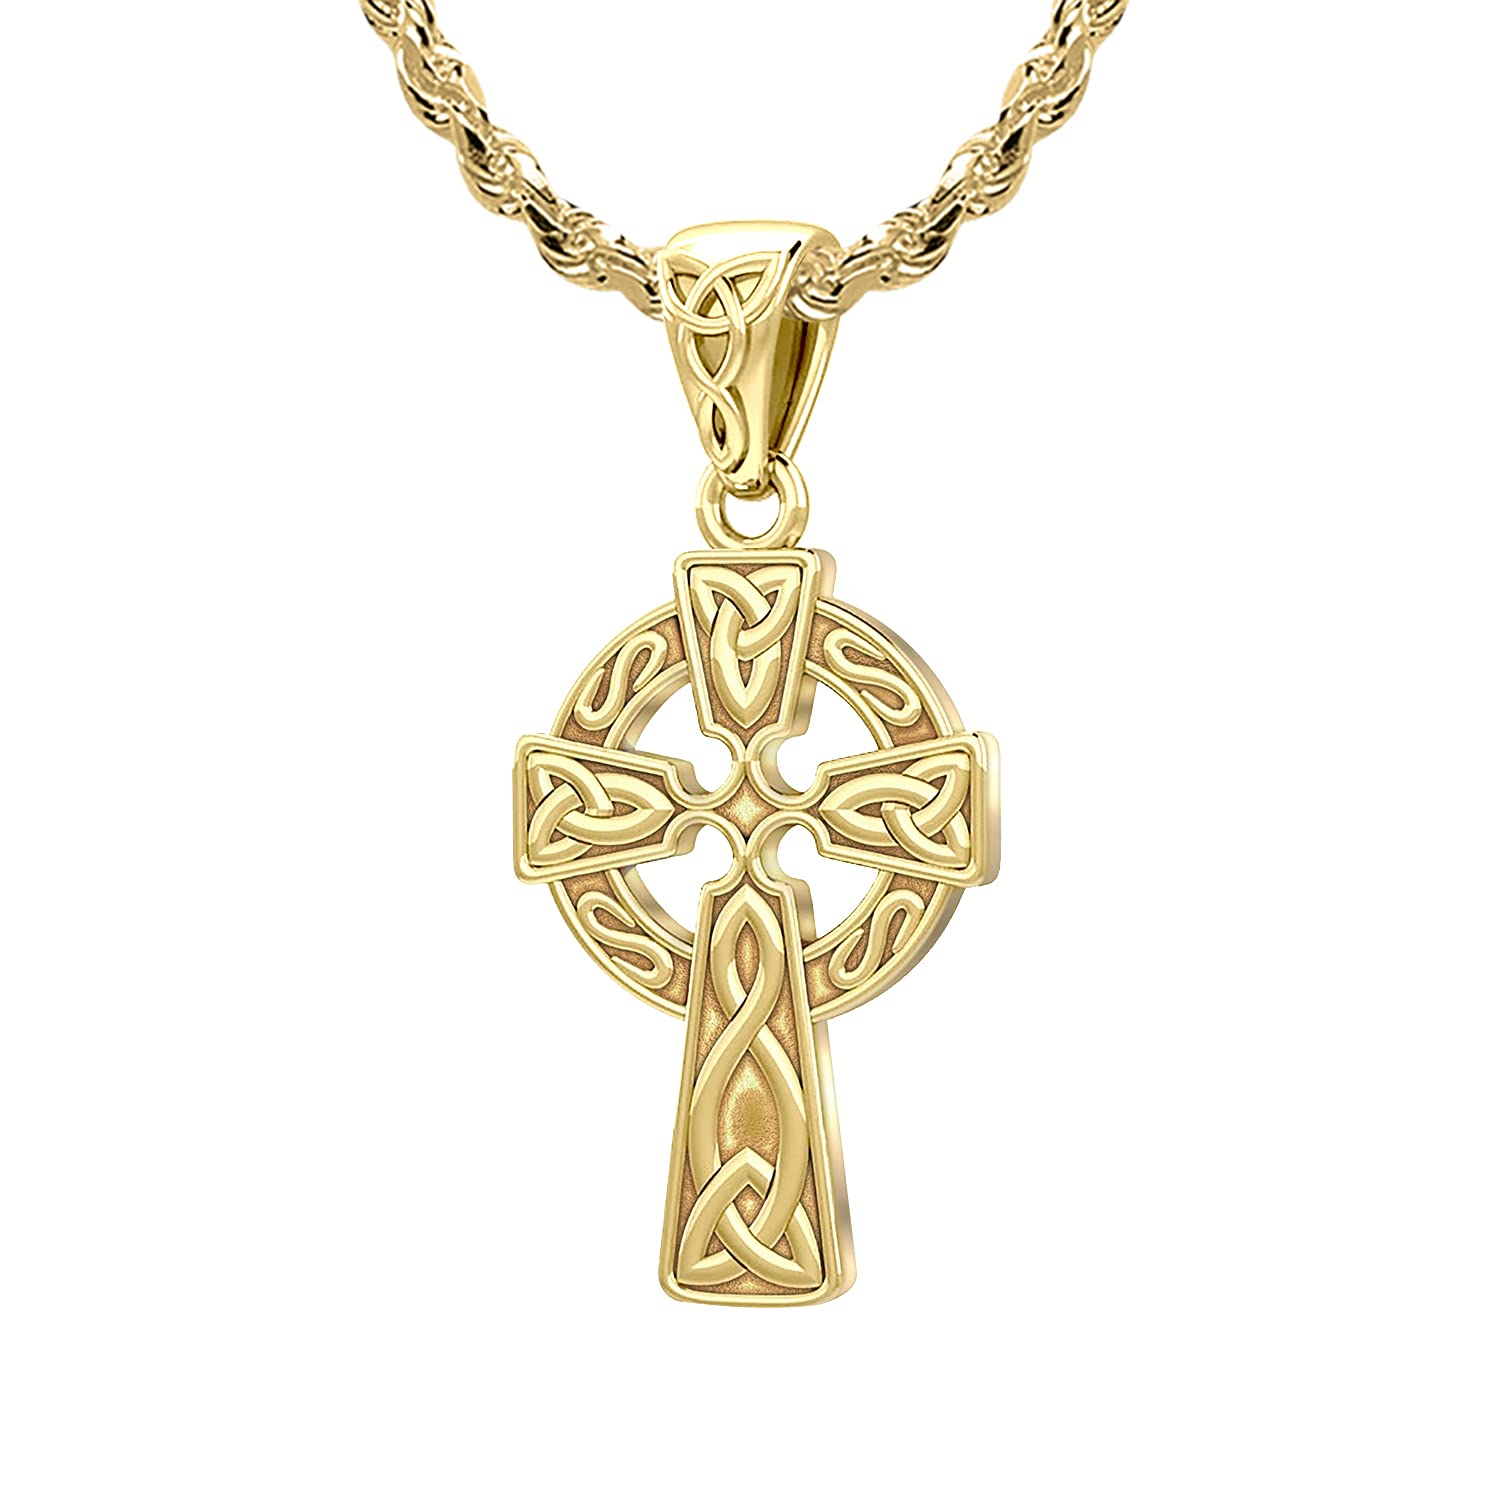 Claddagh Necklace - Cross Pendant Necklace In Gold